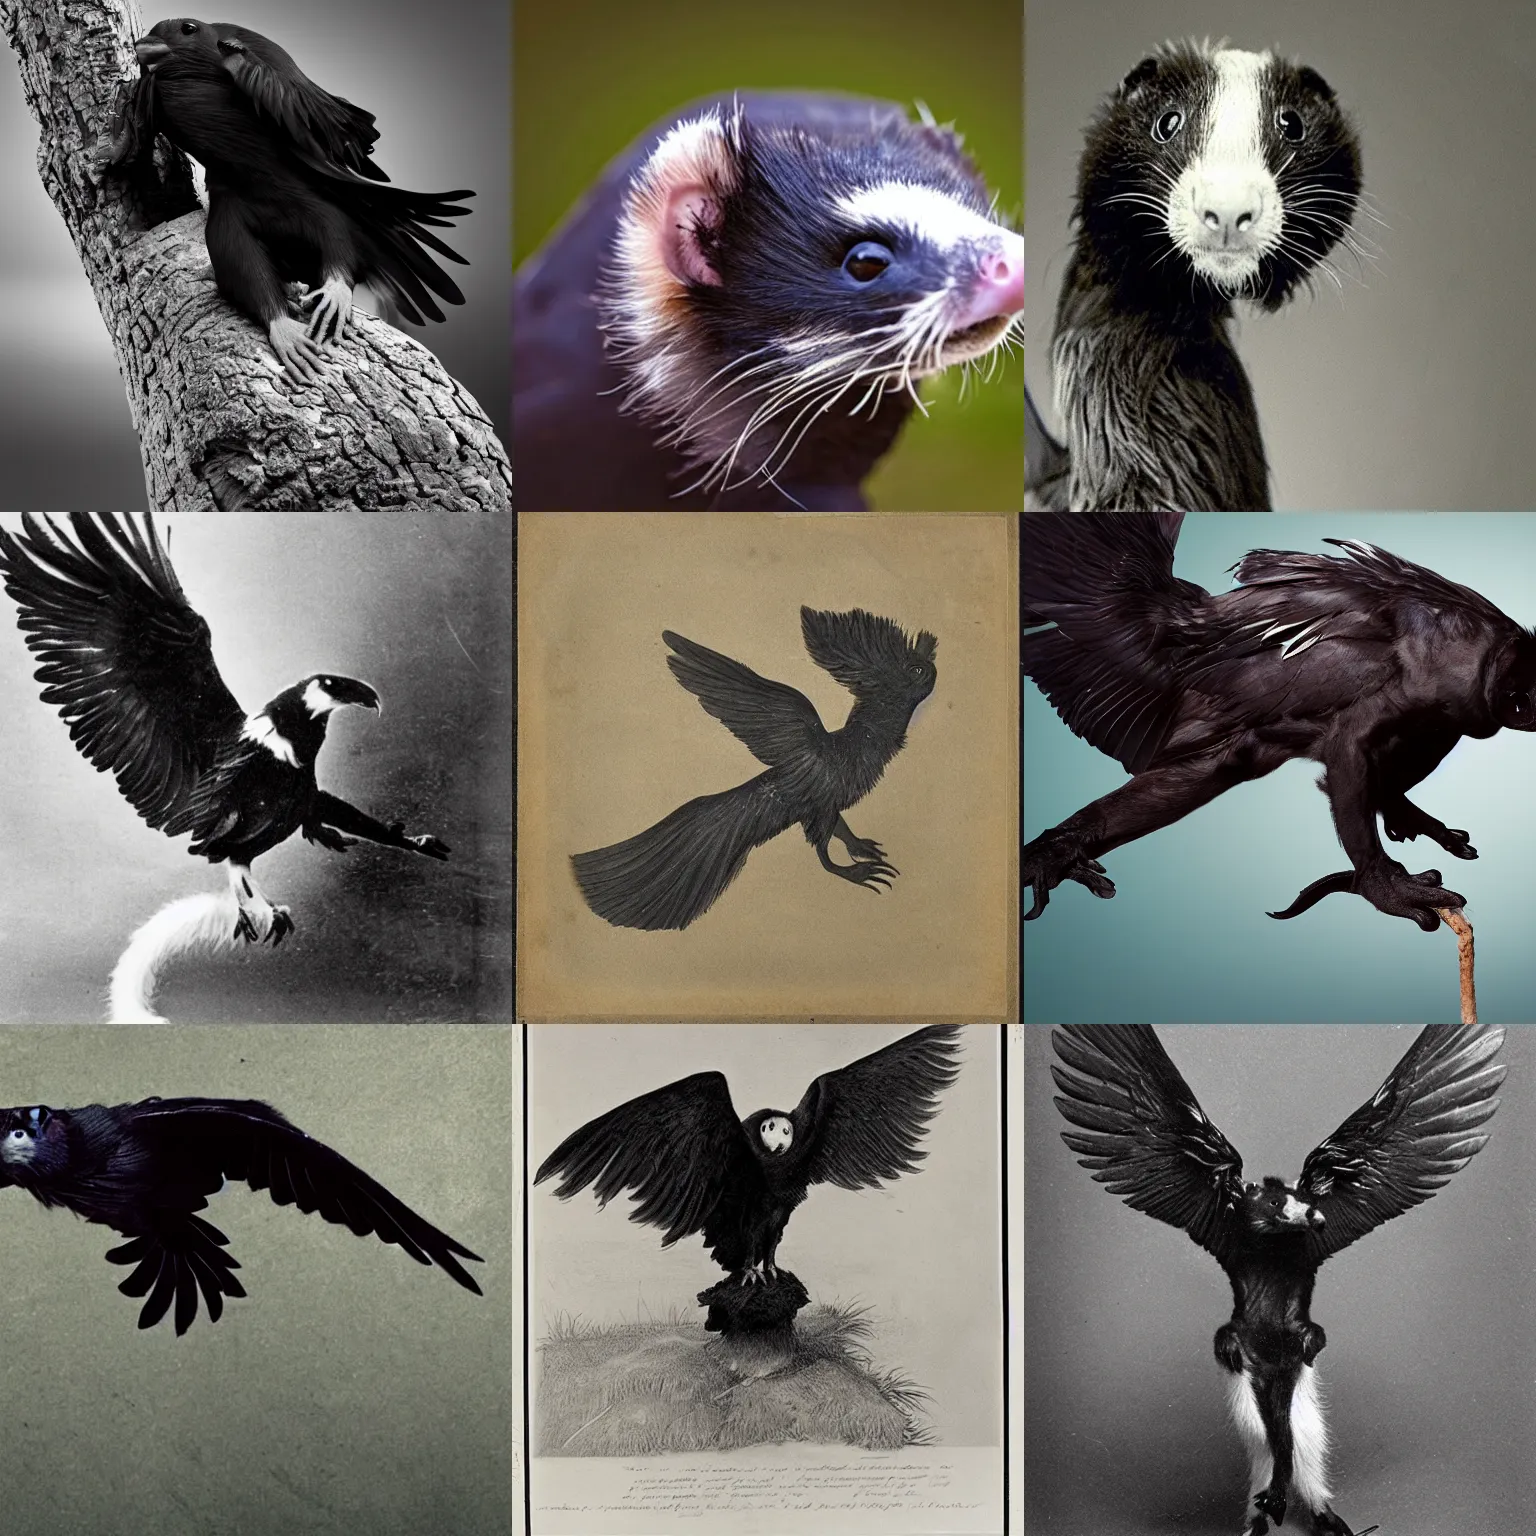 Prompt: photograph of a creature with the body of a ferret, wings and beak of a raven.